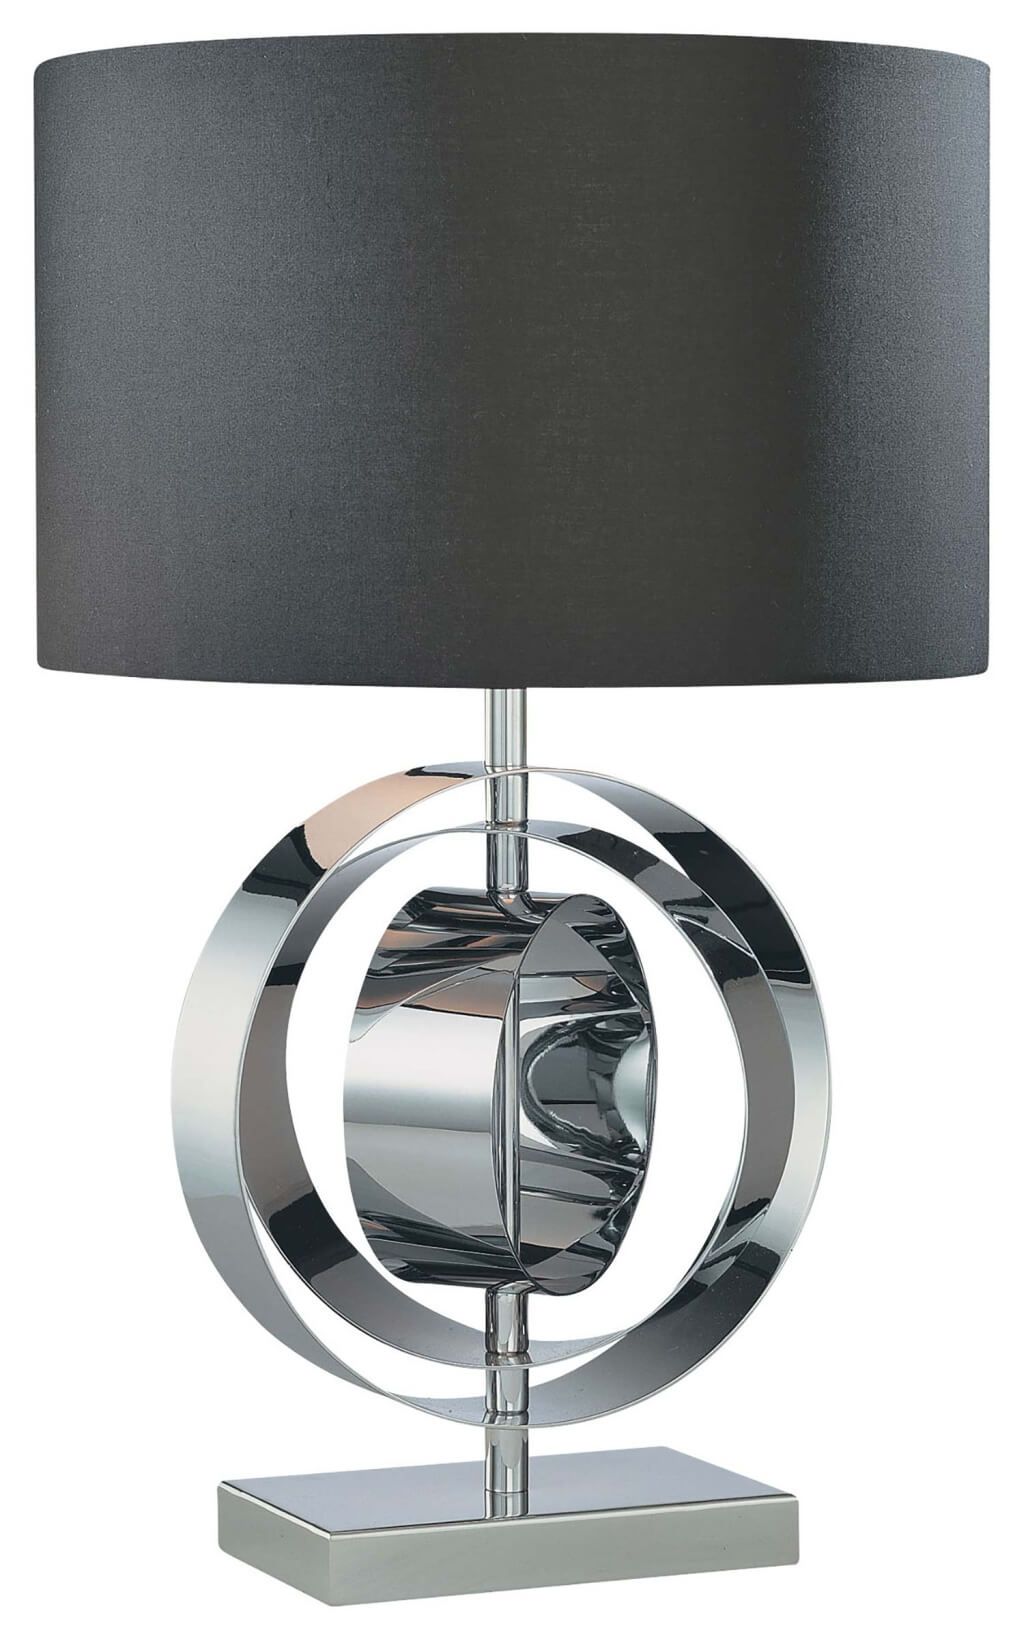 lighting decorative mini contemporary table lamp with unique metal stunning dark grey drum polished chrome circular base buffet lamps accent design and tall white square glass